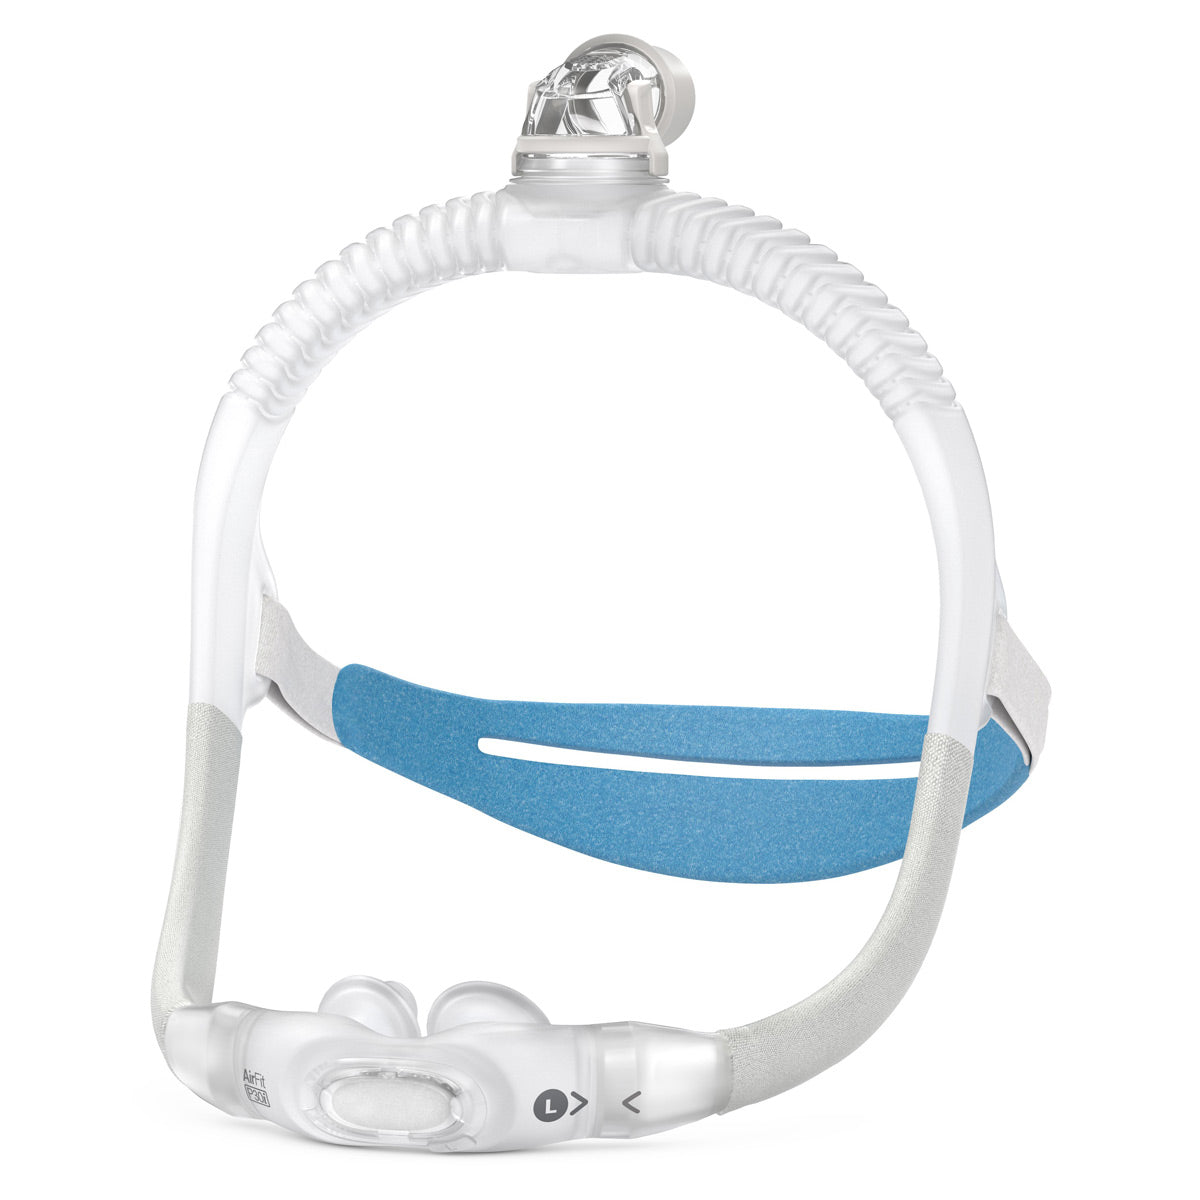 AirFit P30i Nasal Pillow CPAP/BiLevel Mask with Headgear